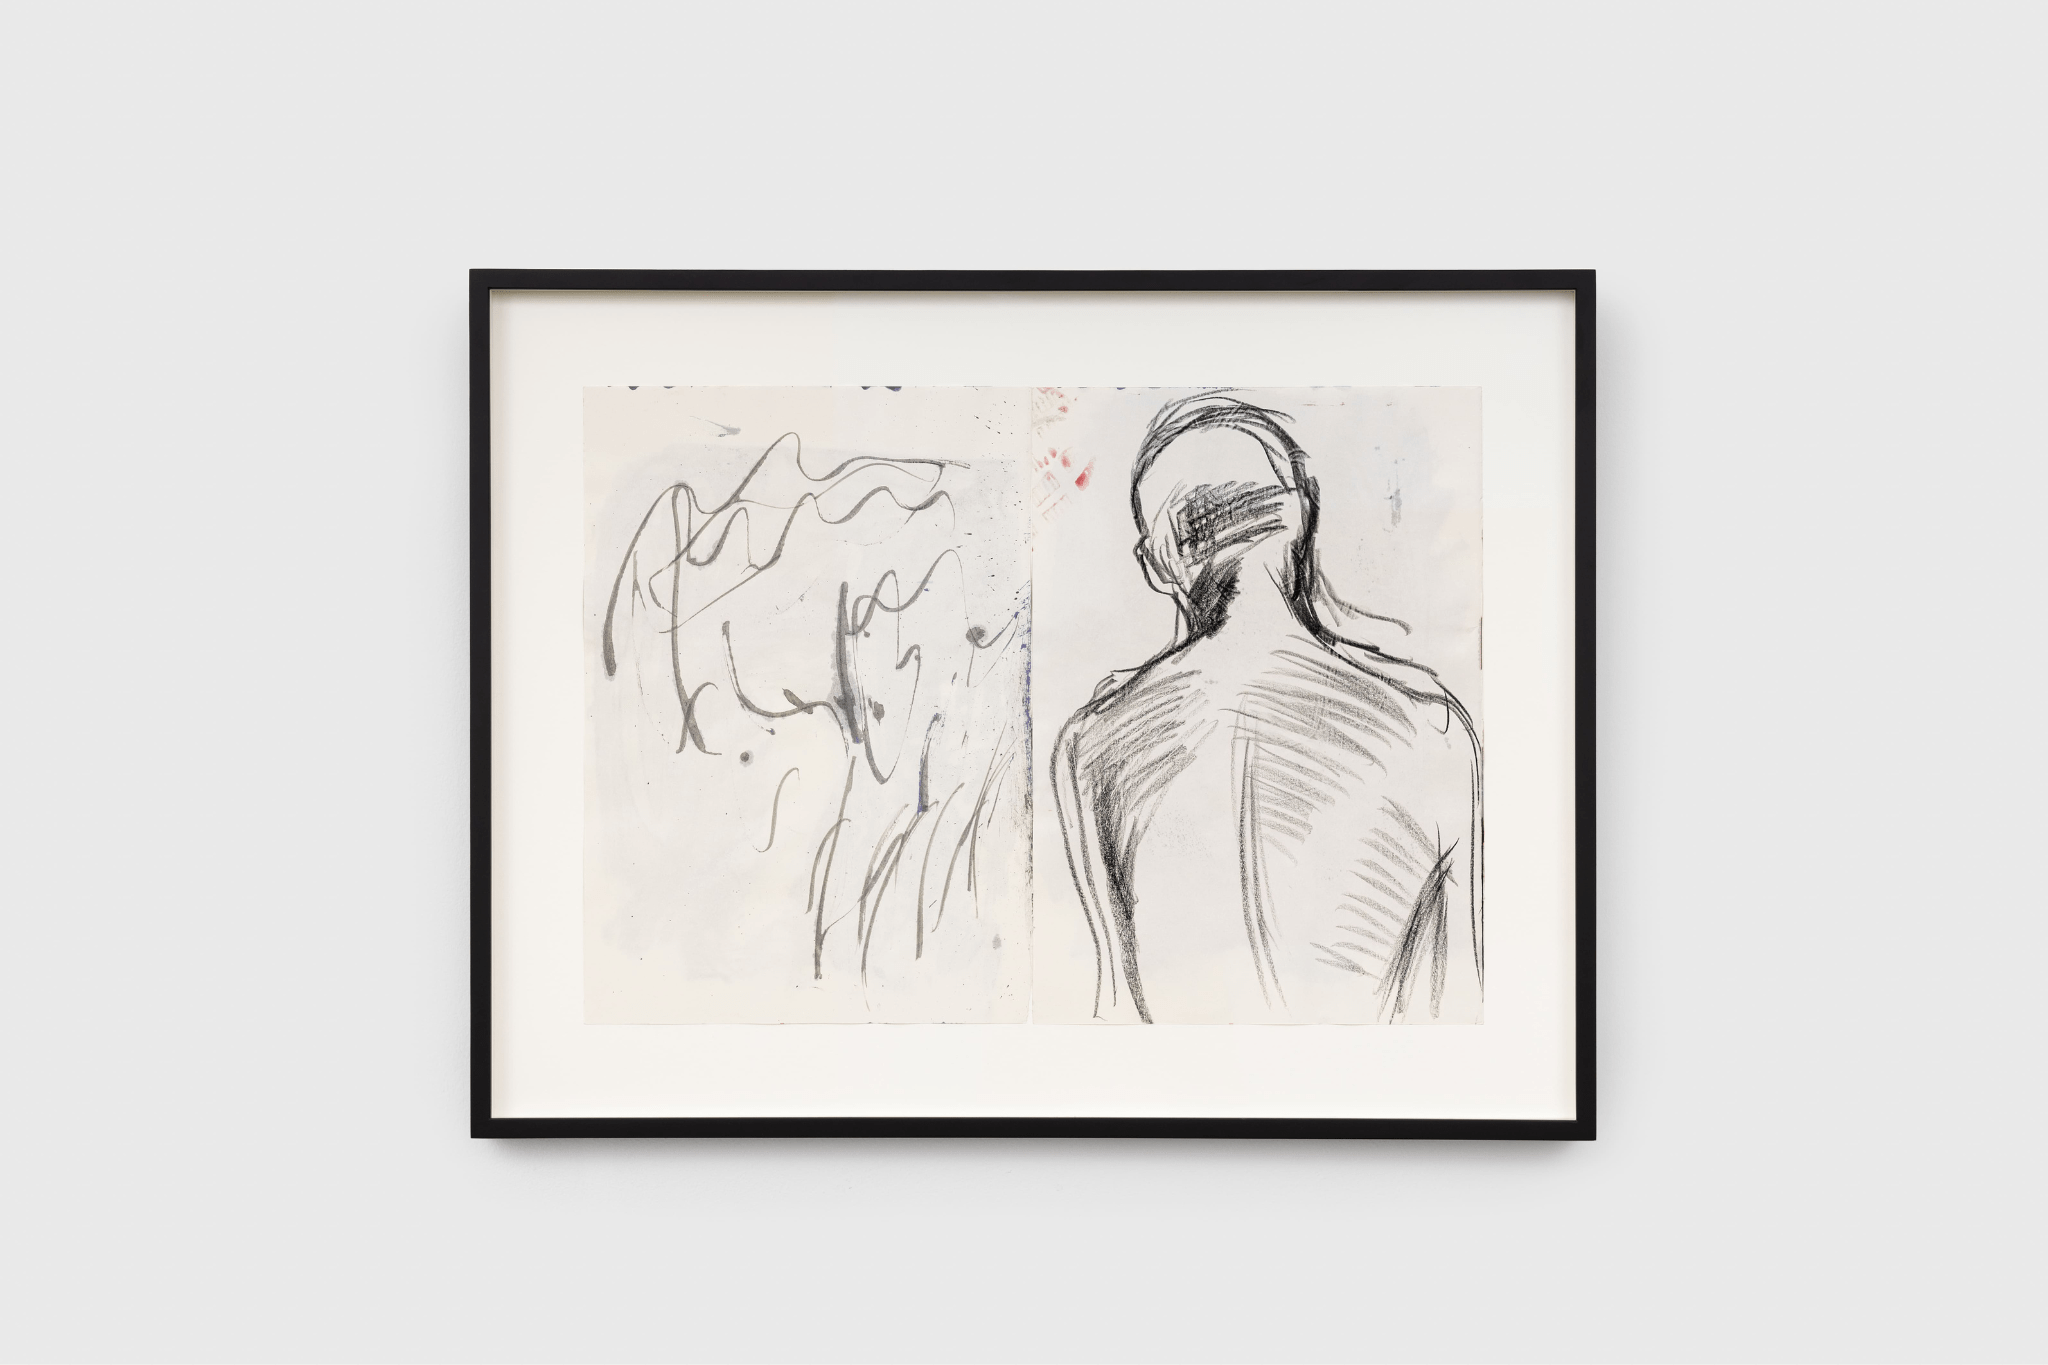 Nick Mauss, Untitled, 2019, Ink, crayon and gouache on paper Courtesy of the artist and Galerie Chantal Crousel, Paris Photo: Jiayun Deng — Galerie Chantal Crousel